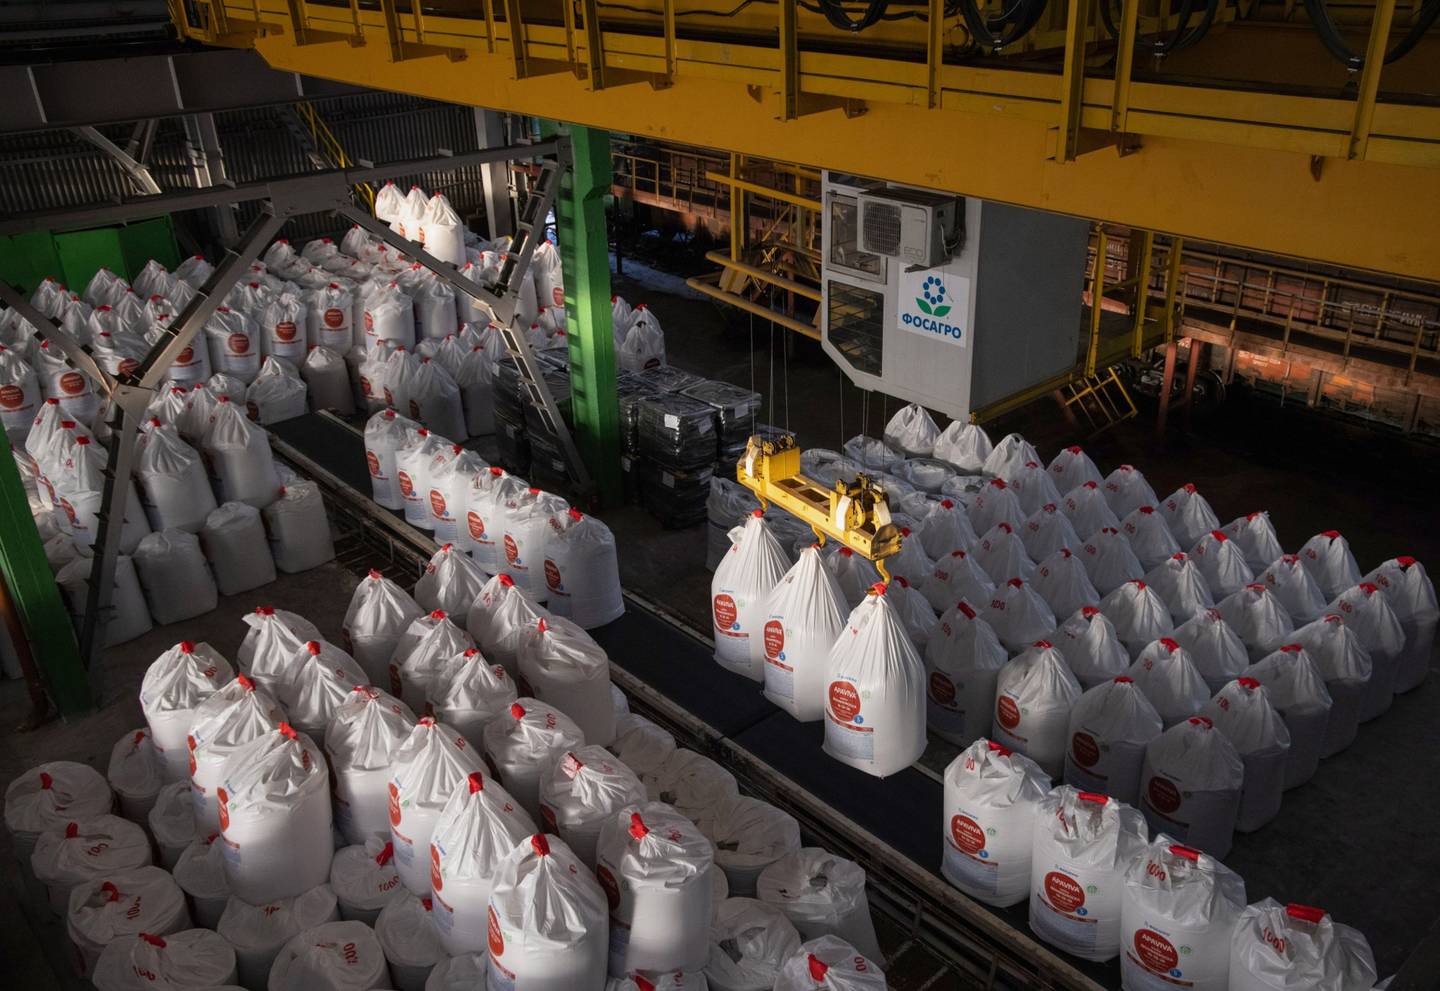 A worker operates a crane to lift sacks of Apaviva NPK(S) phosphate fertilizer at the PhosAgro-Cherepovets fertilizer plant, operated by PhosAgro PJSC, in Cherepovets, Russia, on Thursday, Dec. 2, 2021. Russia plans to impose a six-month quota on some fertilizer exports to safeguard local supplies and limit costs for farmers after the energy crisis sent nitrogen nutrient prices soaring. Photographer: Andrey Rudakov/Bloomberg